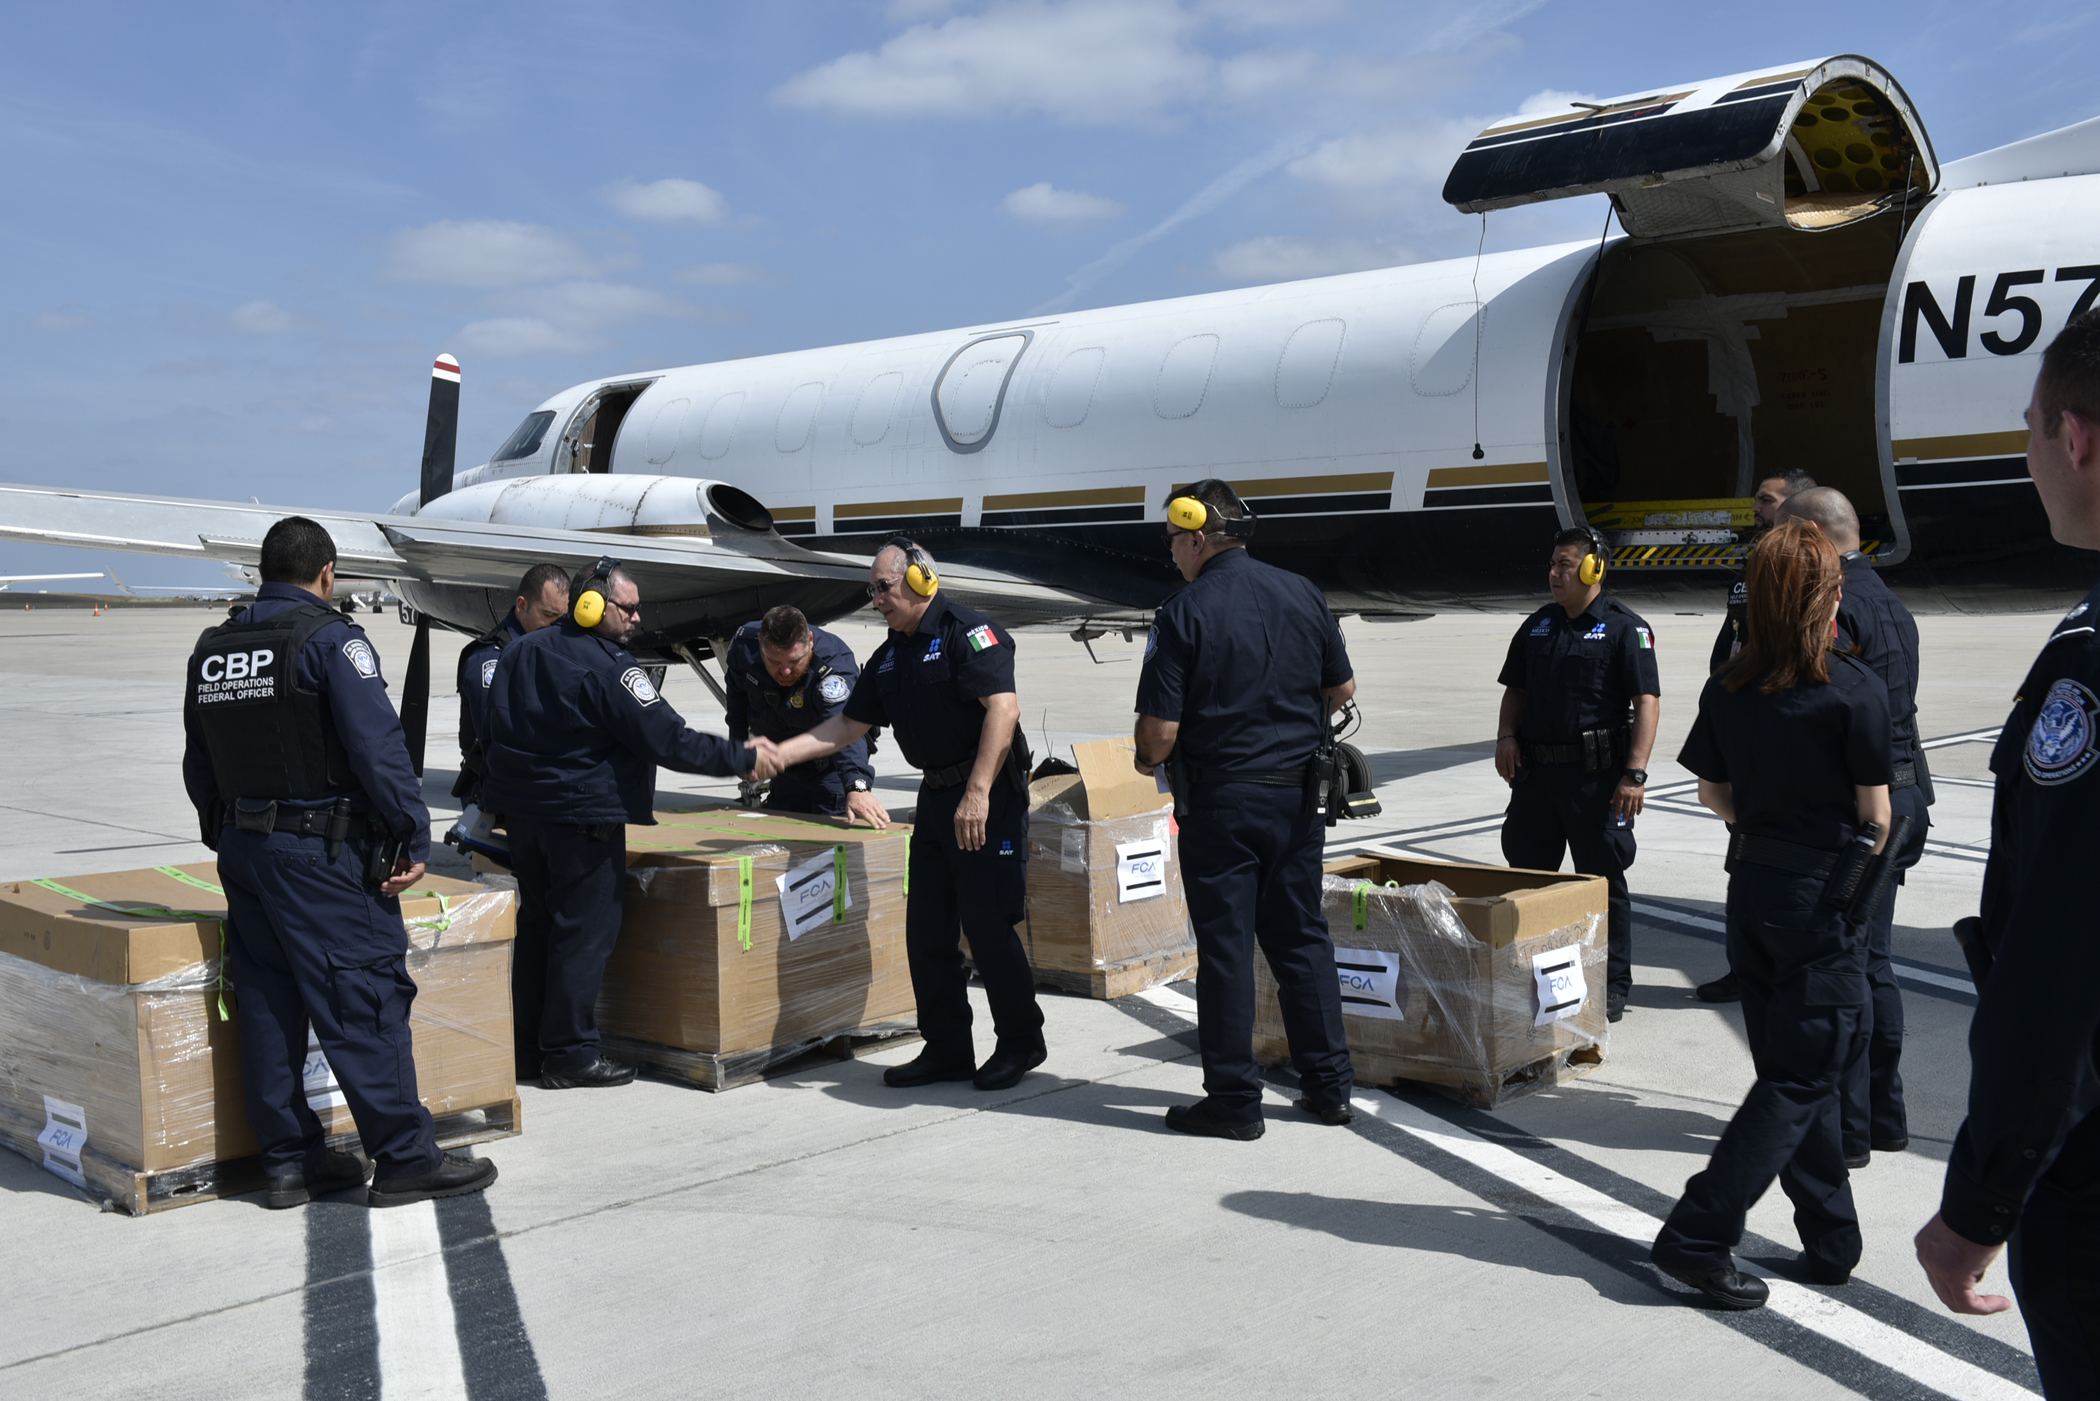 CBP officers onspect a shipment before the flight continues